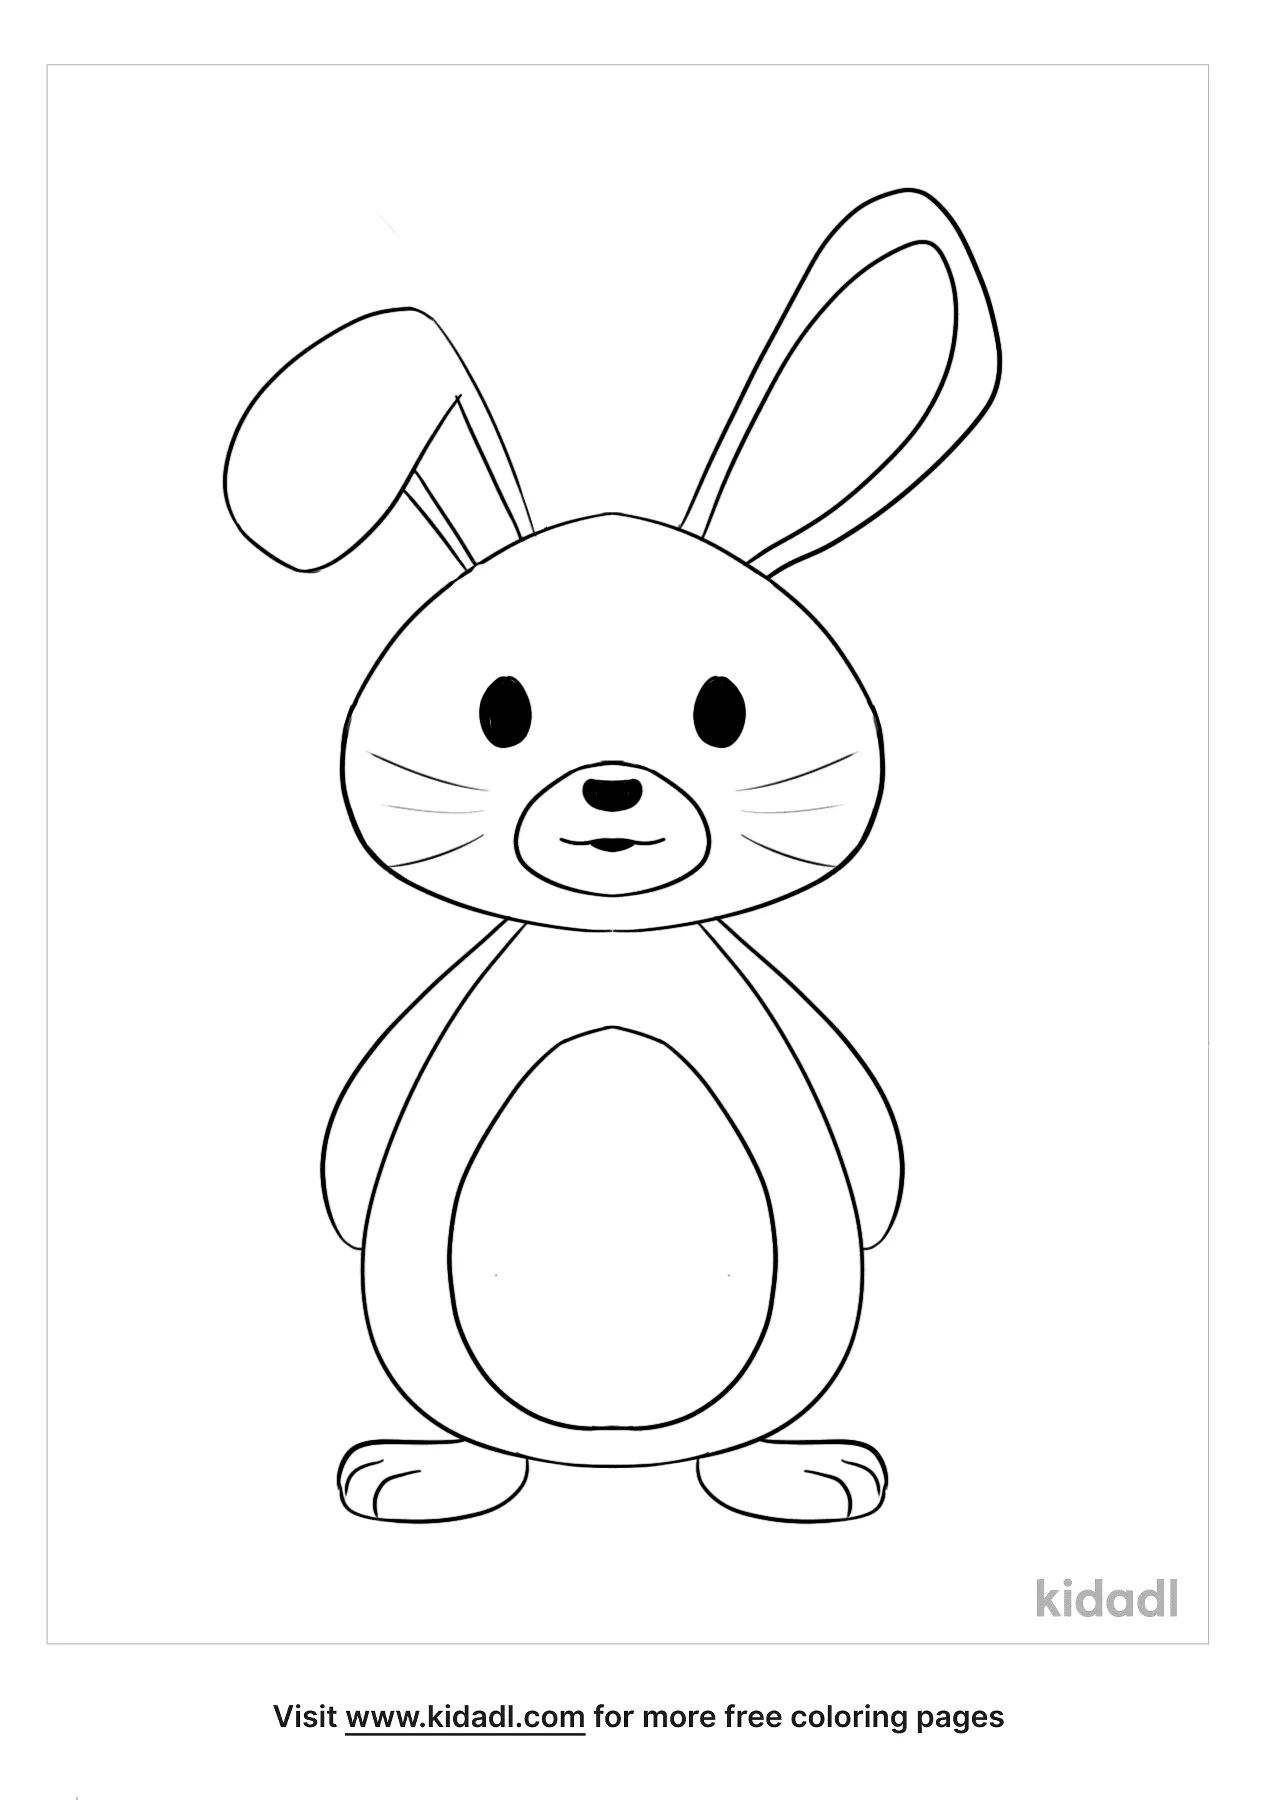 Free Woodland Animals Coloring Page | Coloring Page Printables | Kidadl